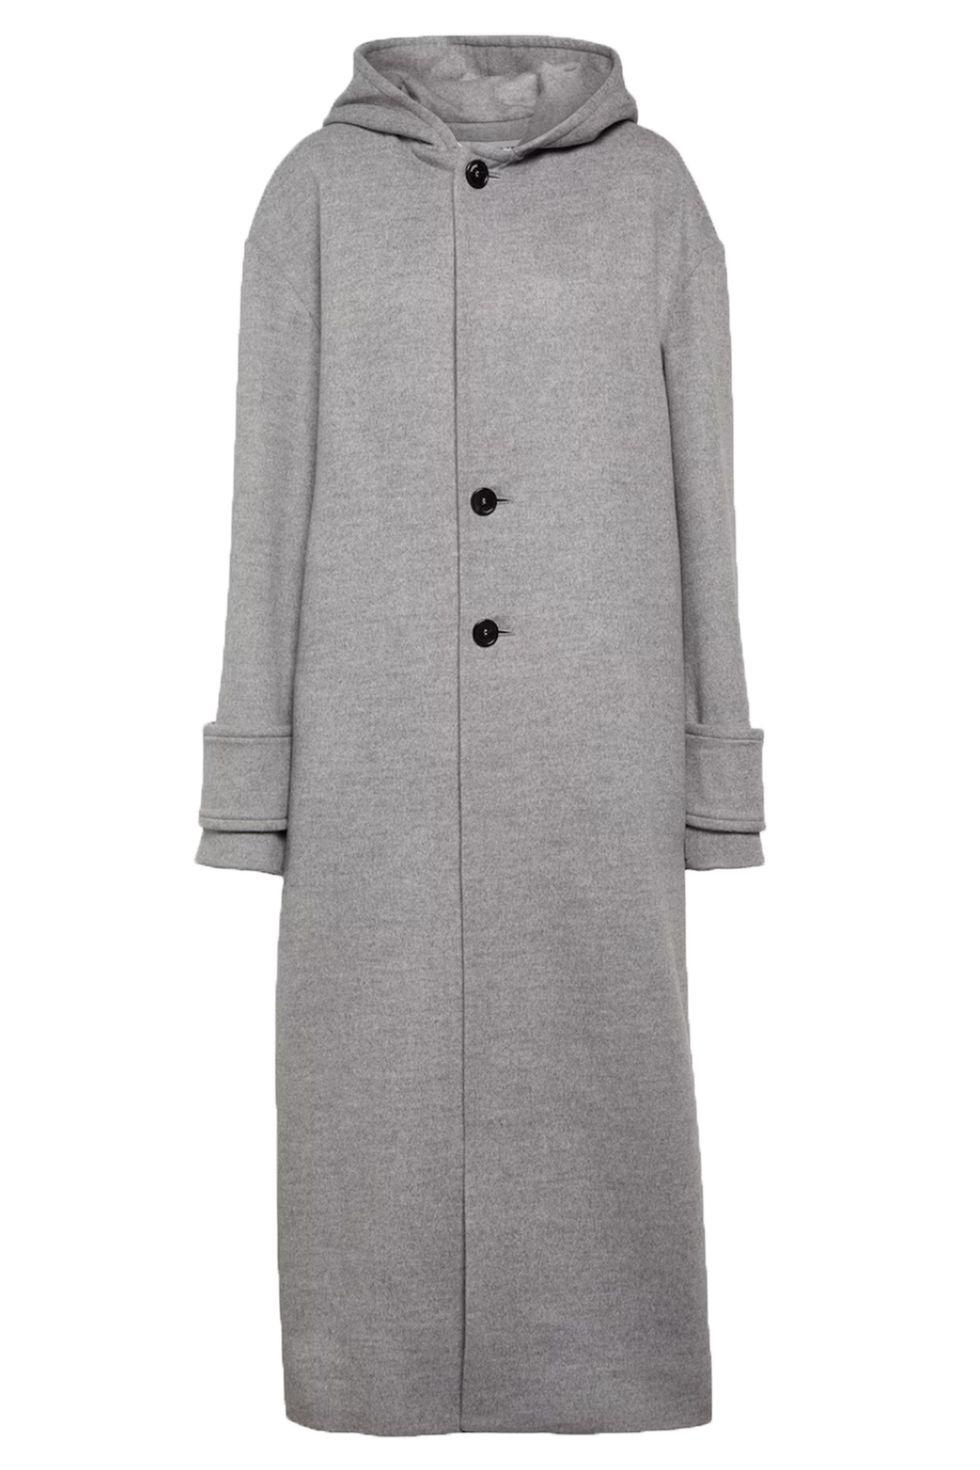 The cosiest cashmere coats to shop now and love forever